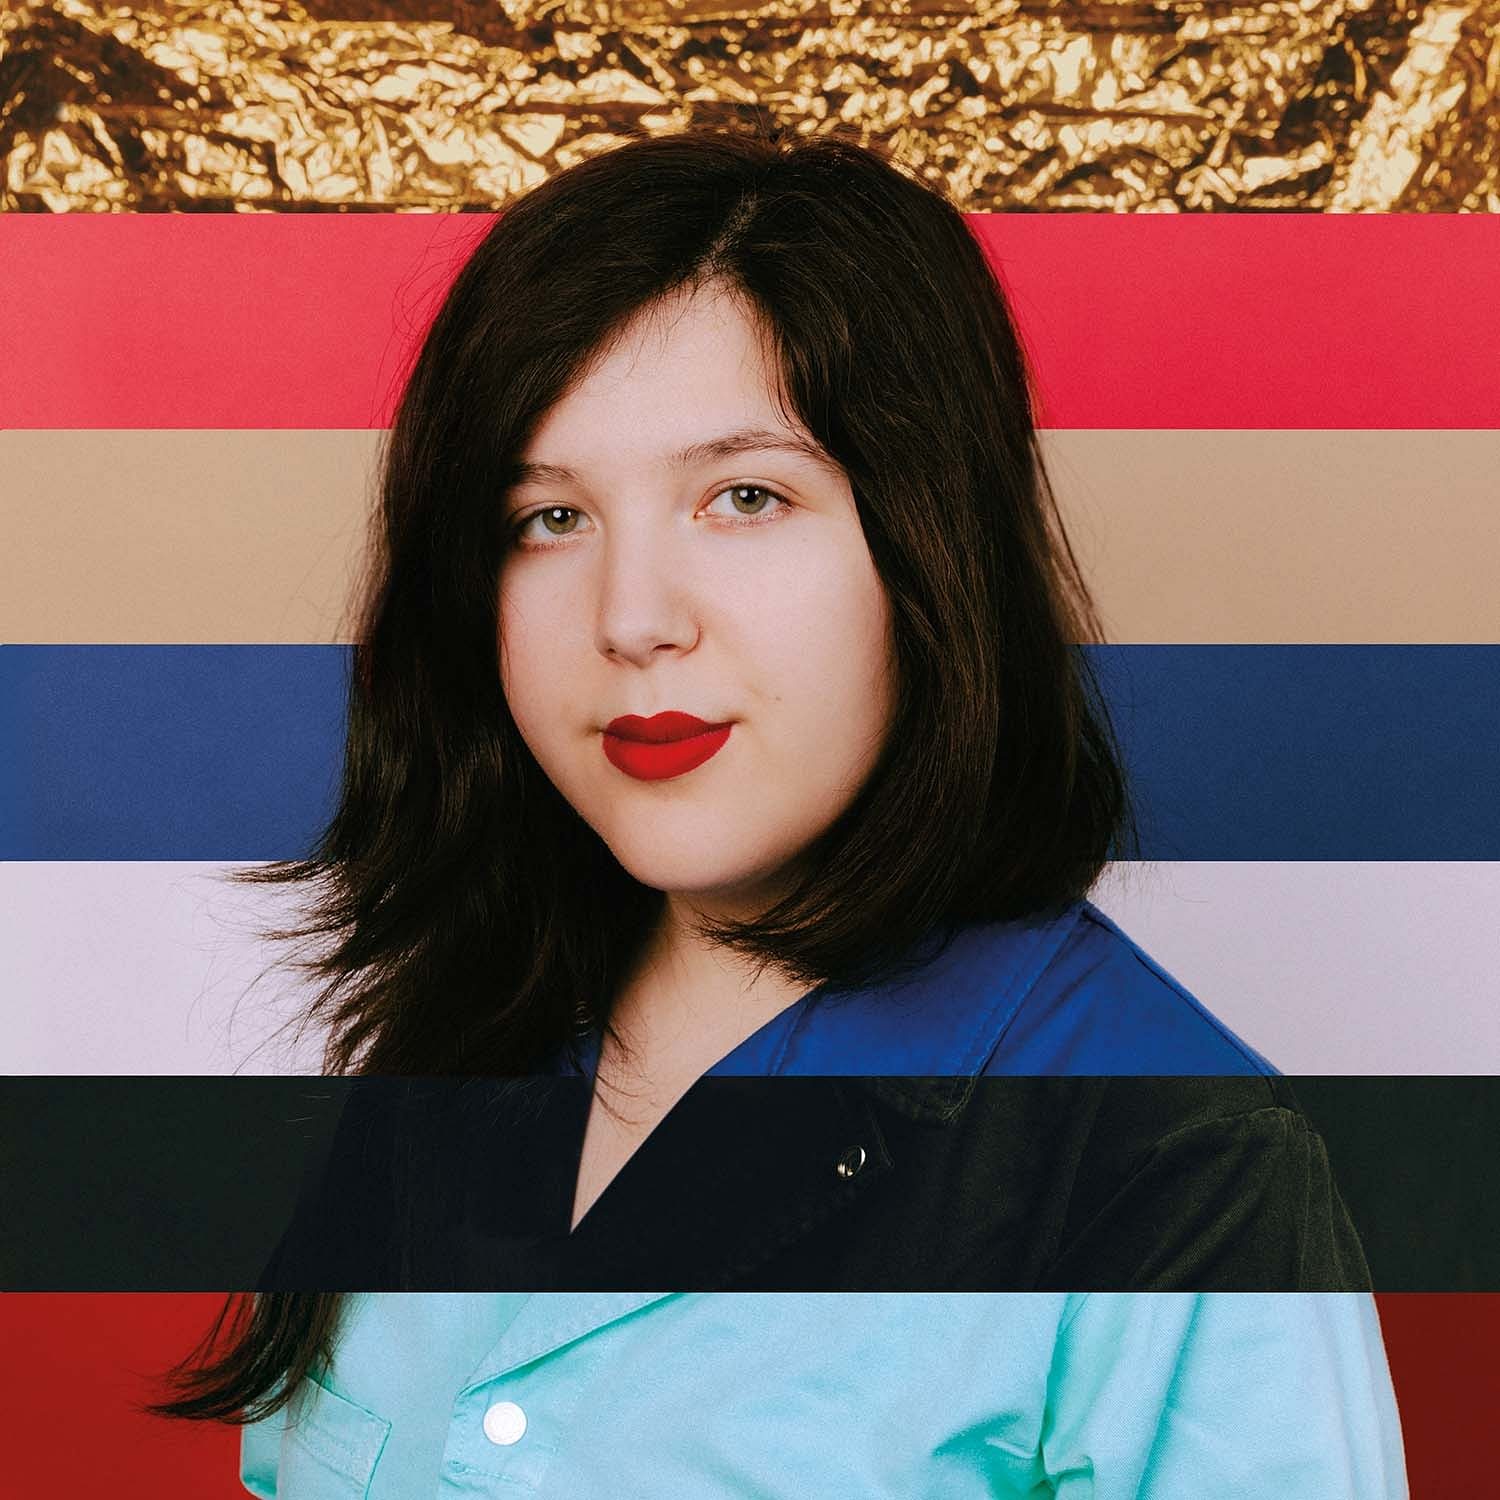 5 years after its original release, Lucy Dacus drops a music video for the  single 'Night Shift